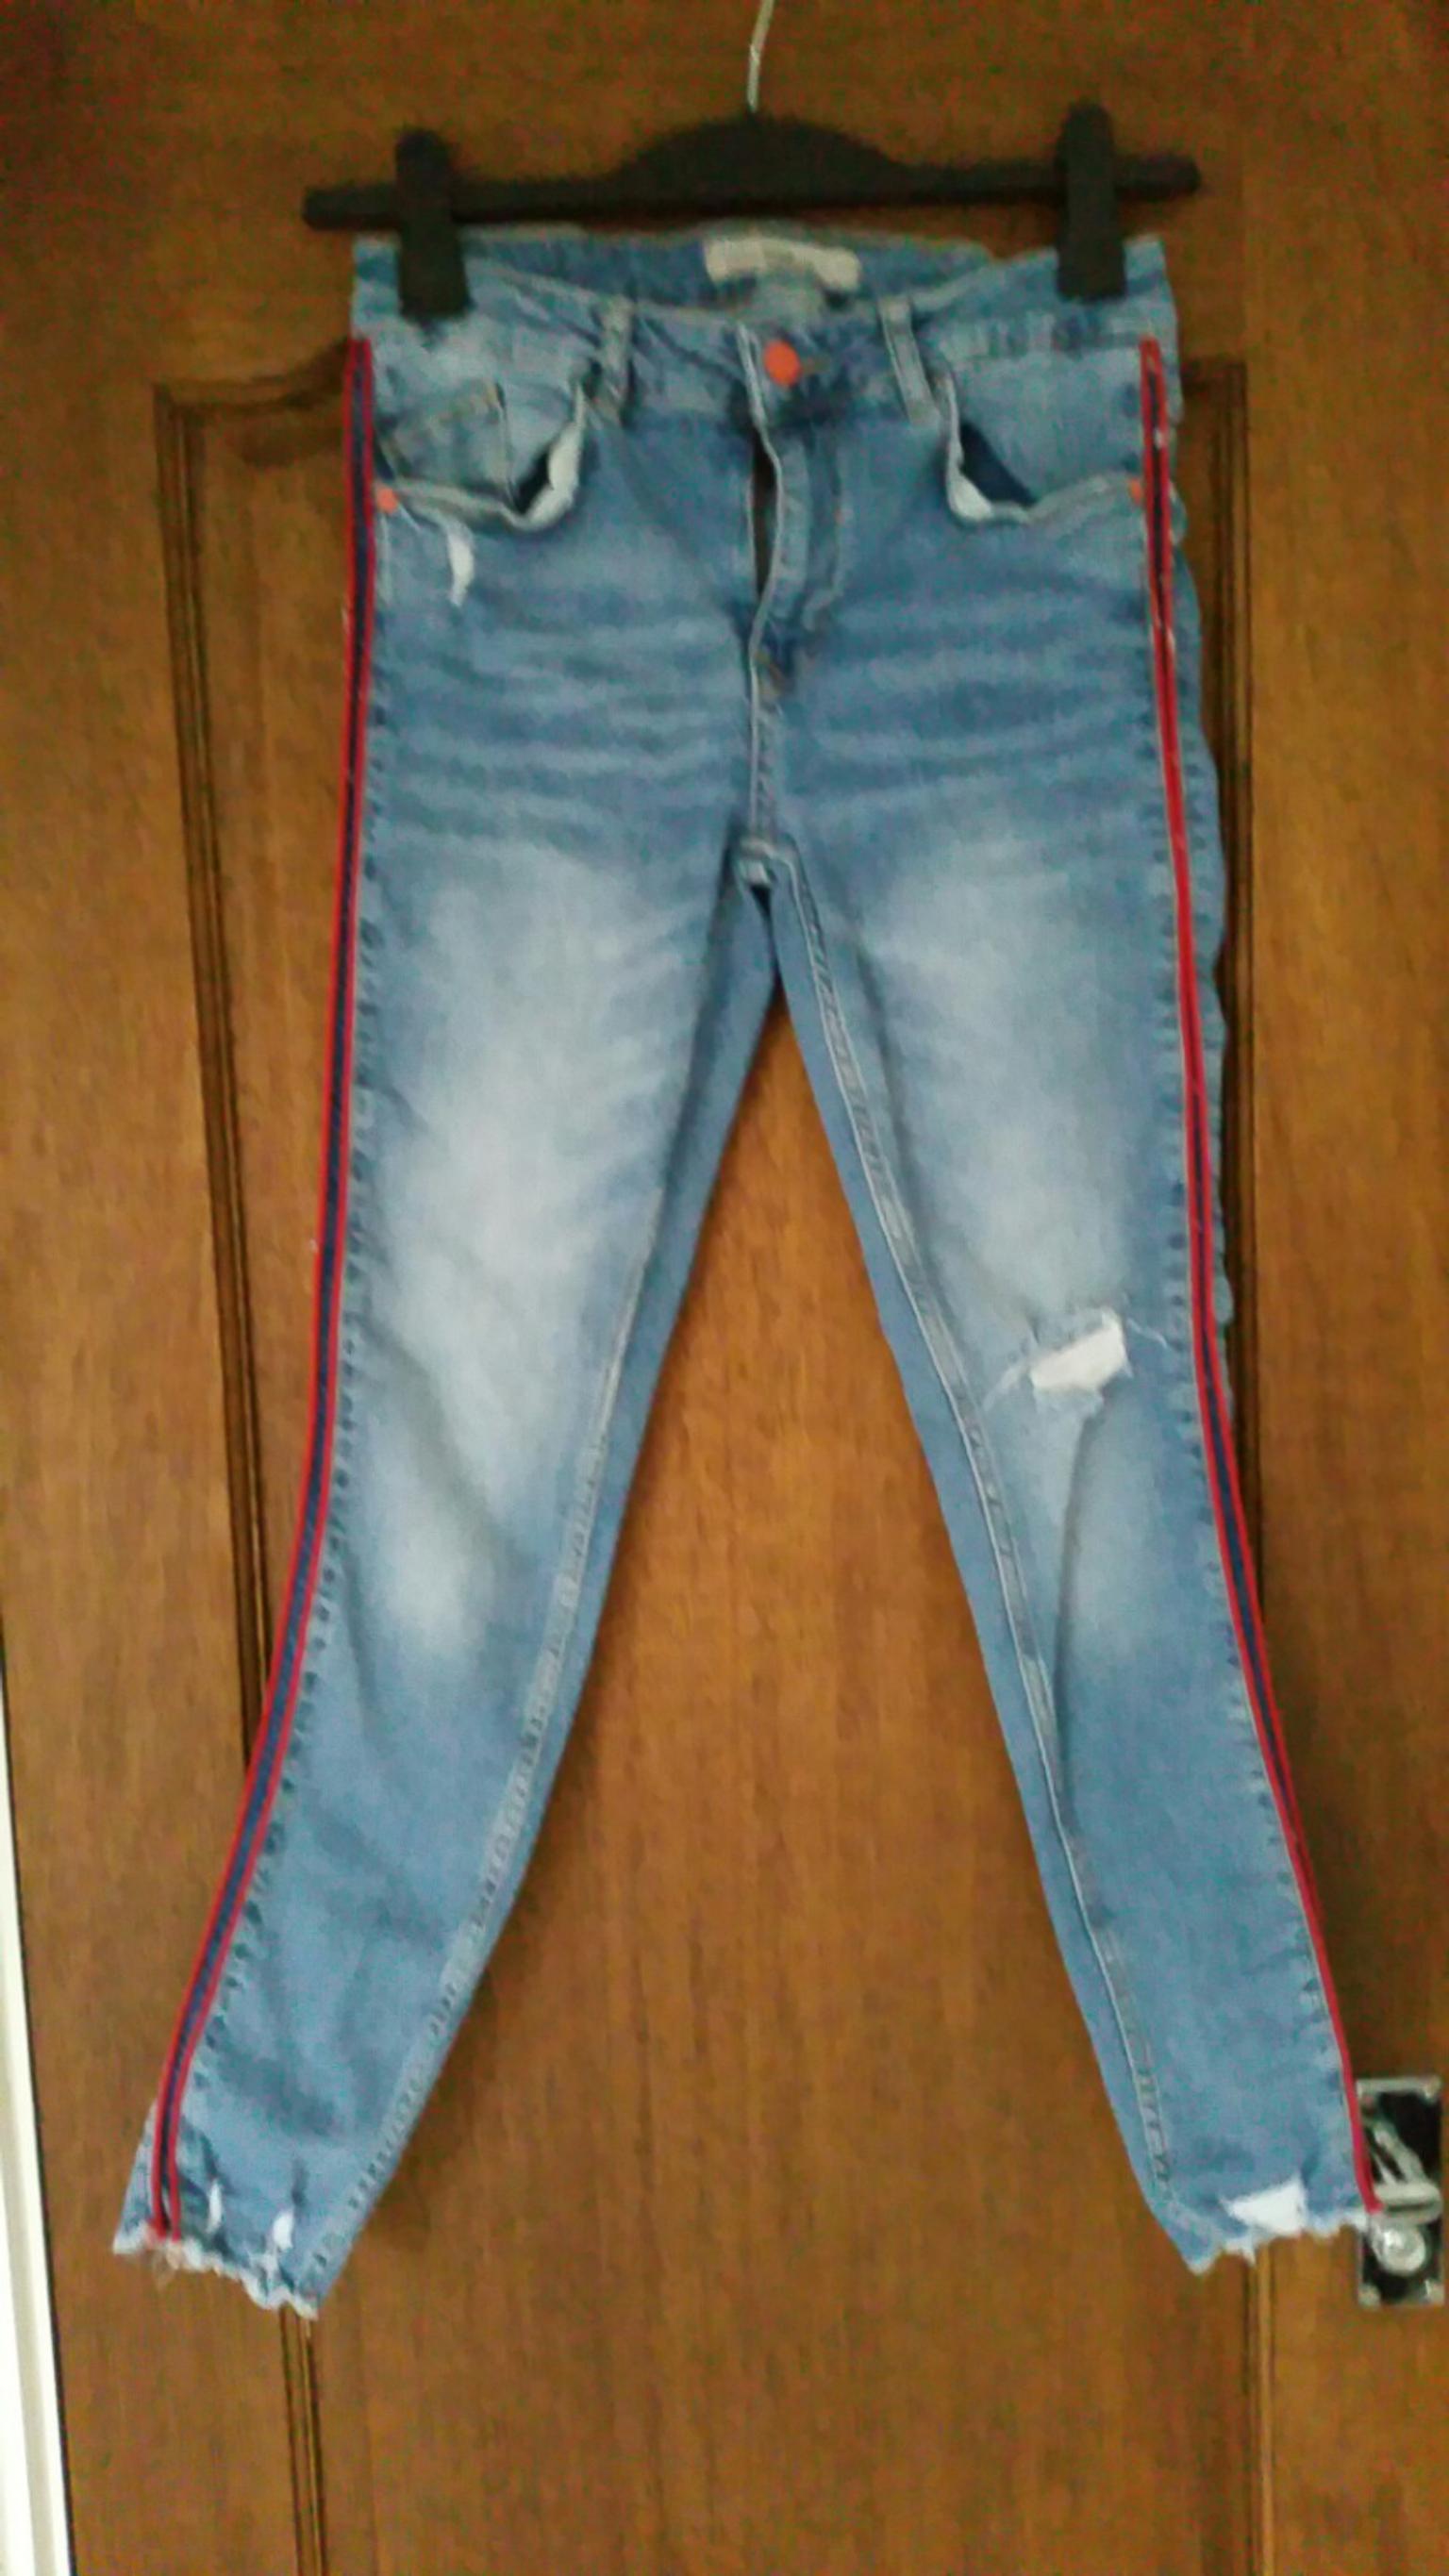 jeans with red piping